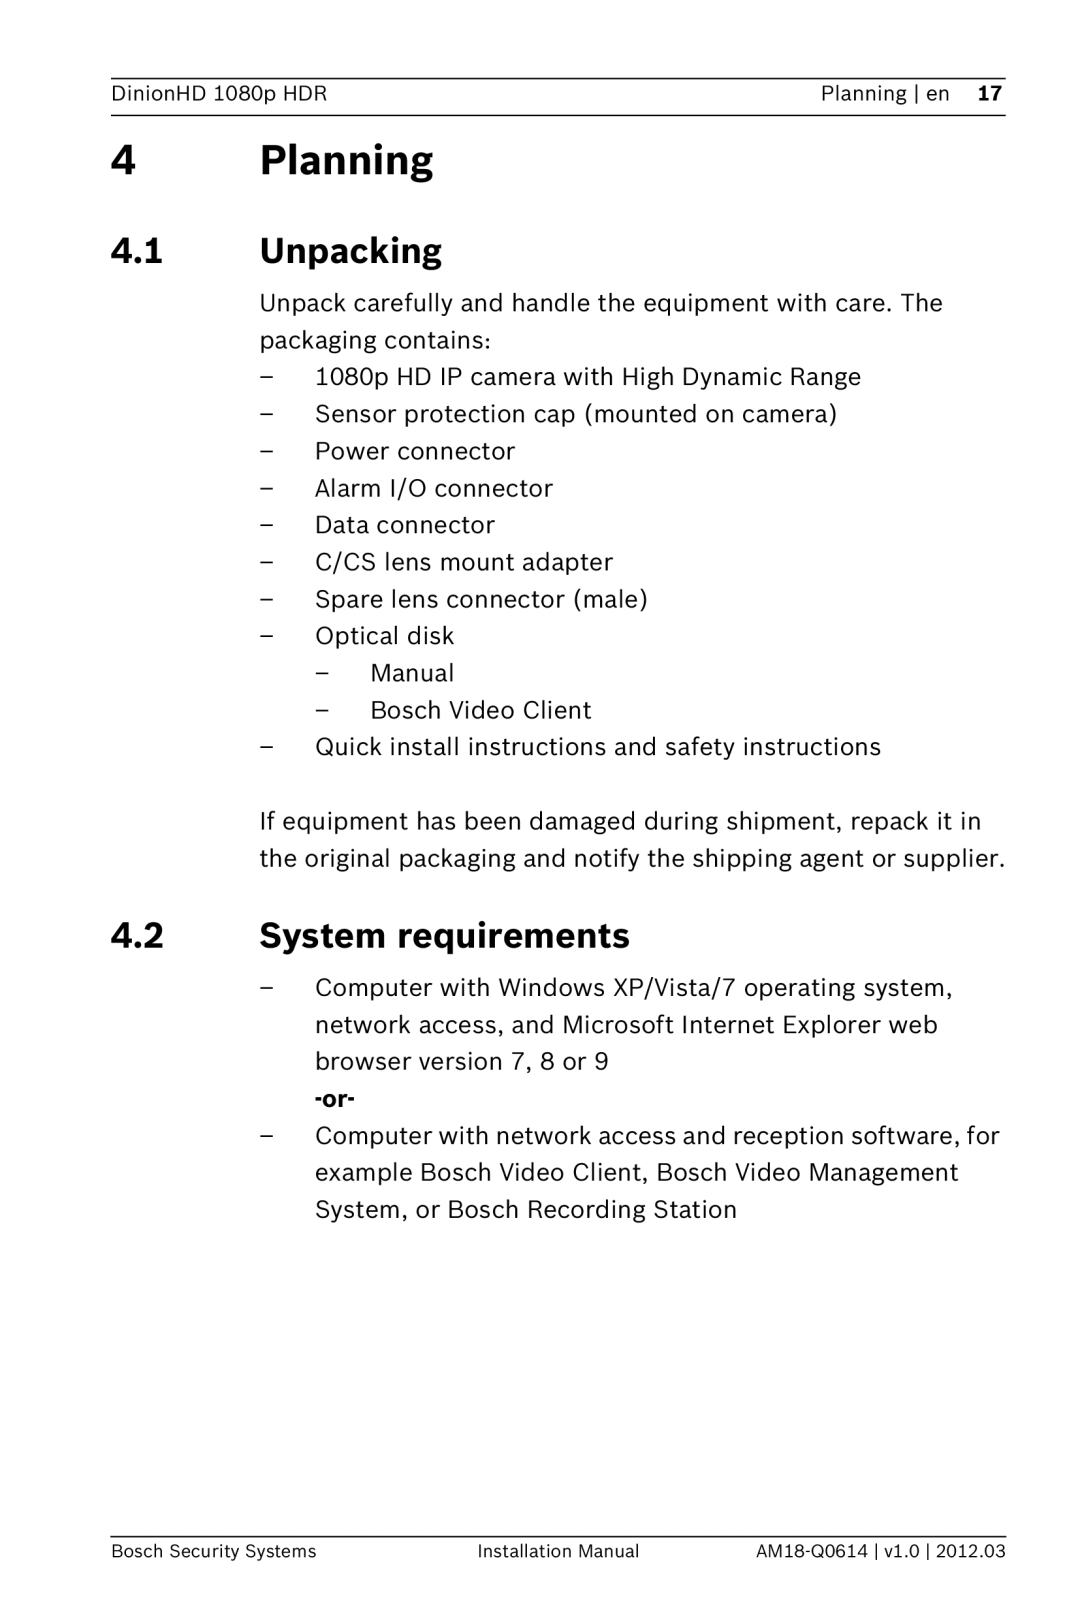 Bosch Appliances nbn-932 installation manual 4Planning, 4.1Unpacking, 4.2System requirements 